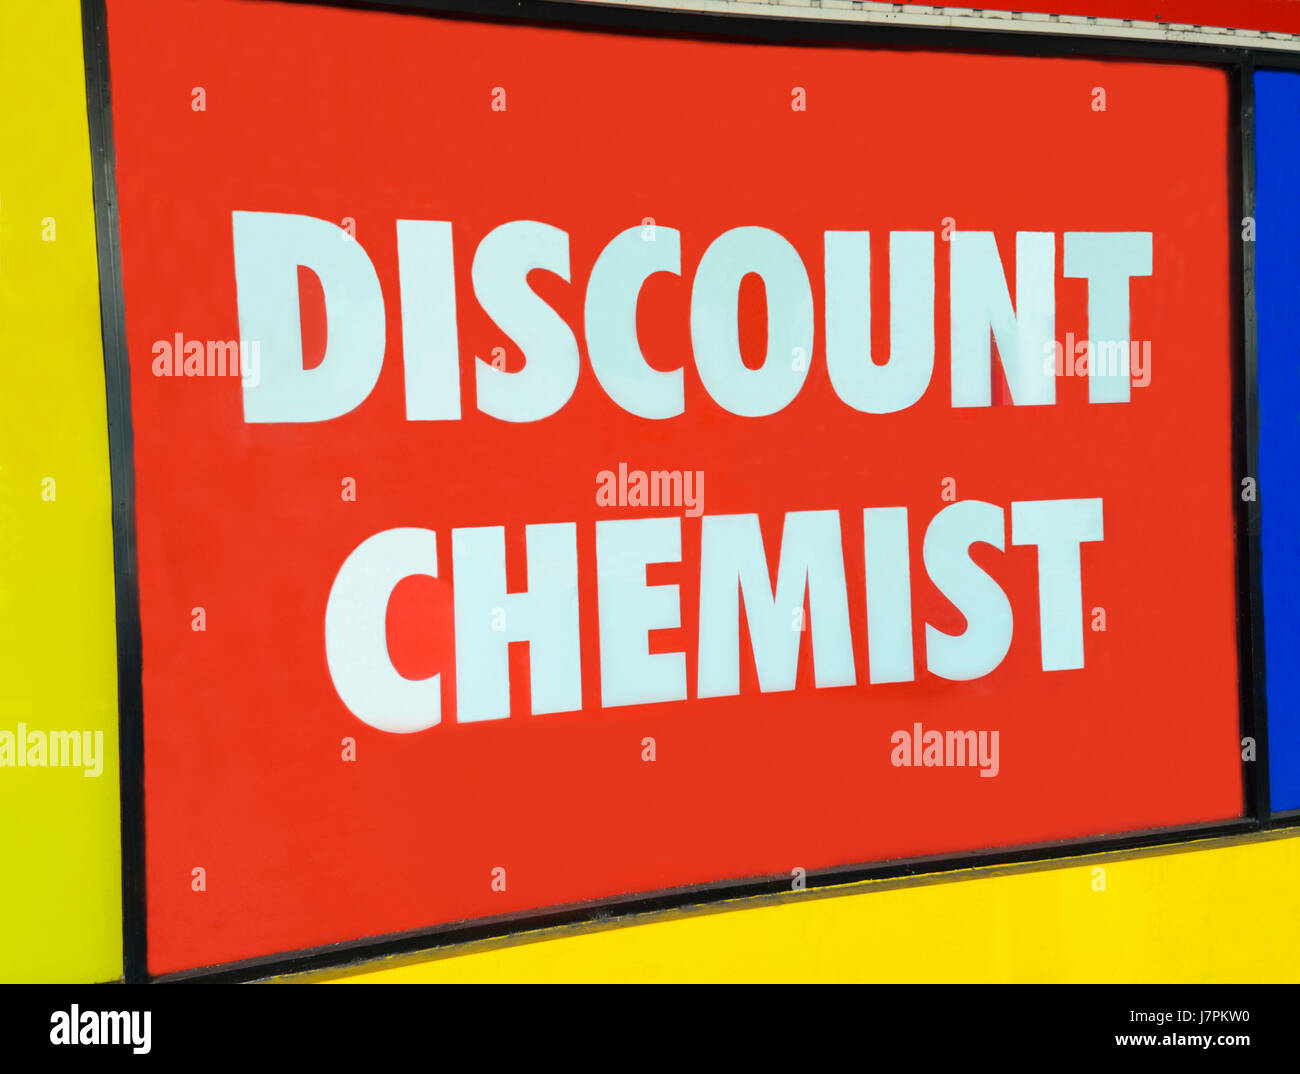 Discount Chemist Sign, New South Wales, NSW, Australia Stock Photo